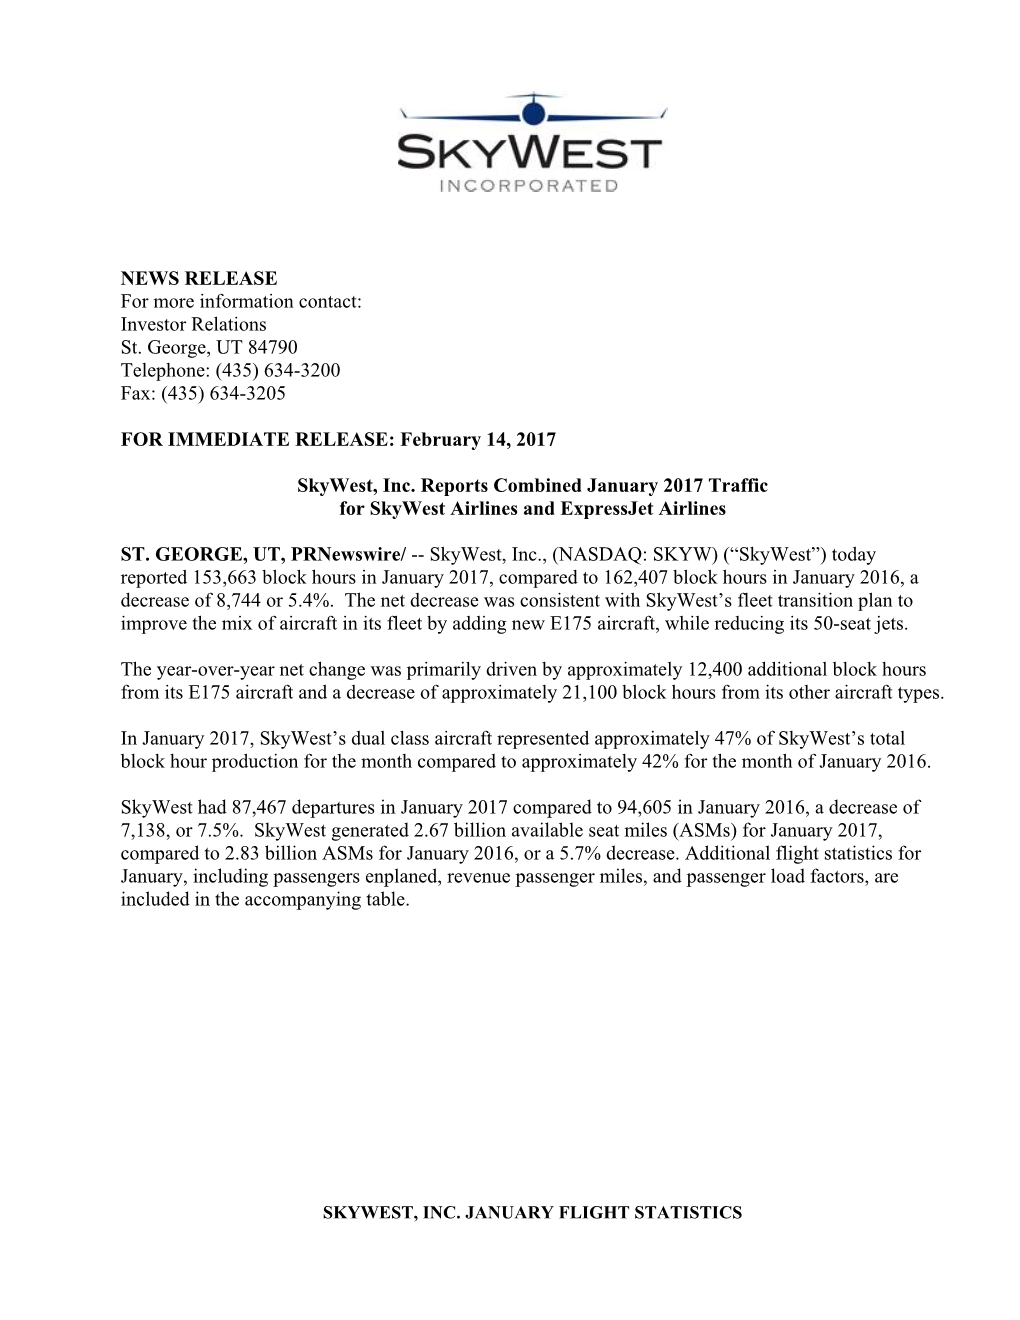 NEWS RELEASE for More Information Contact: Investor Relations St